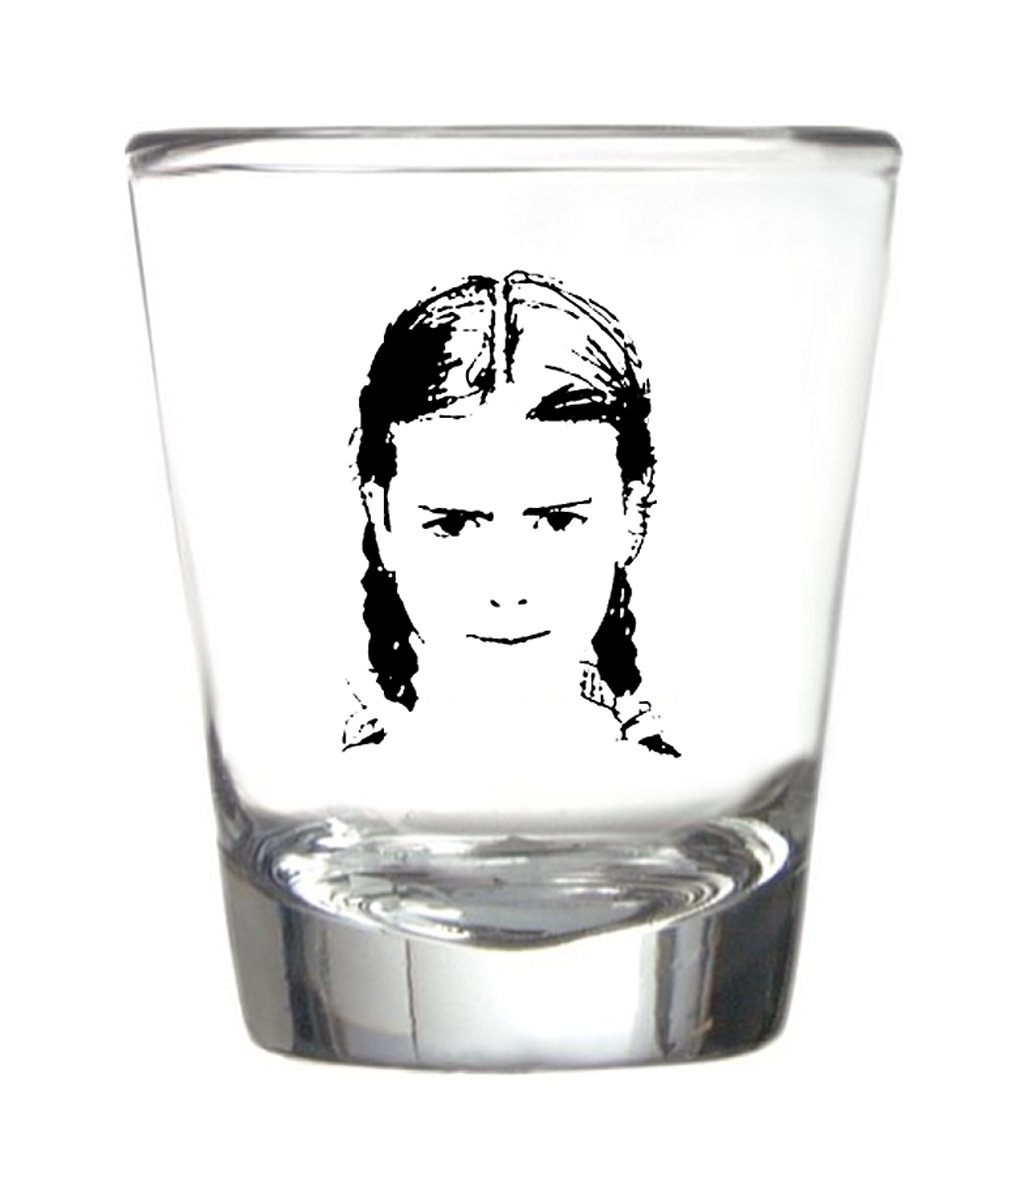 A black line drawing on a shot glass of a serious looking young girl with pigtails.